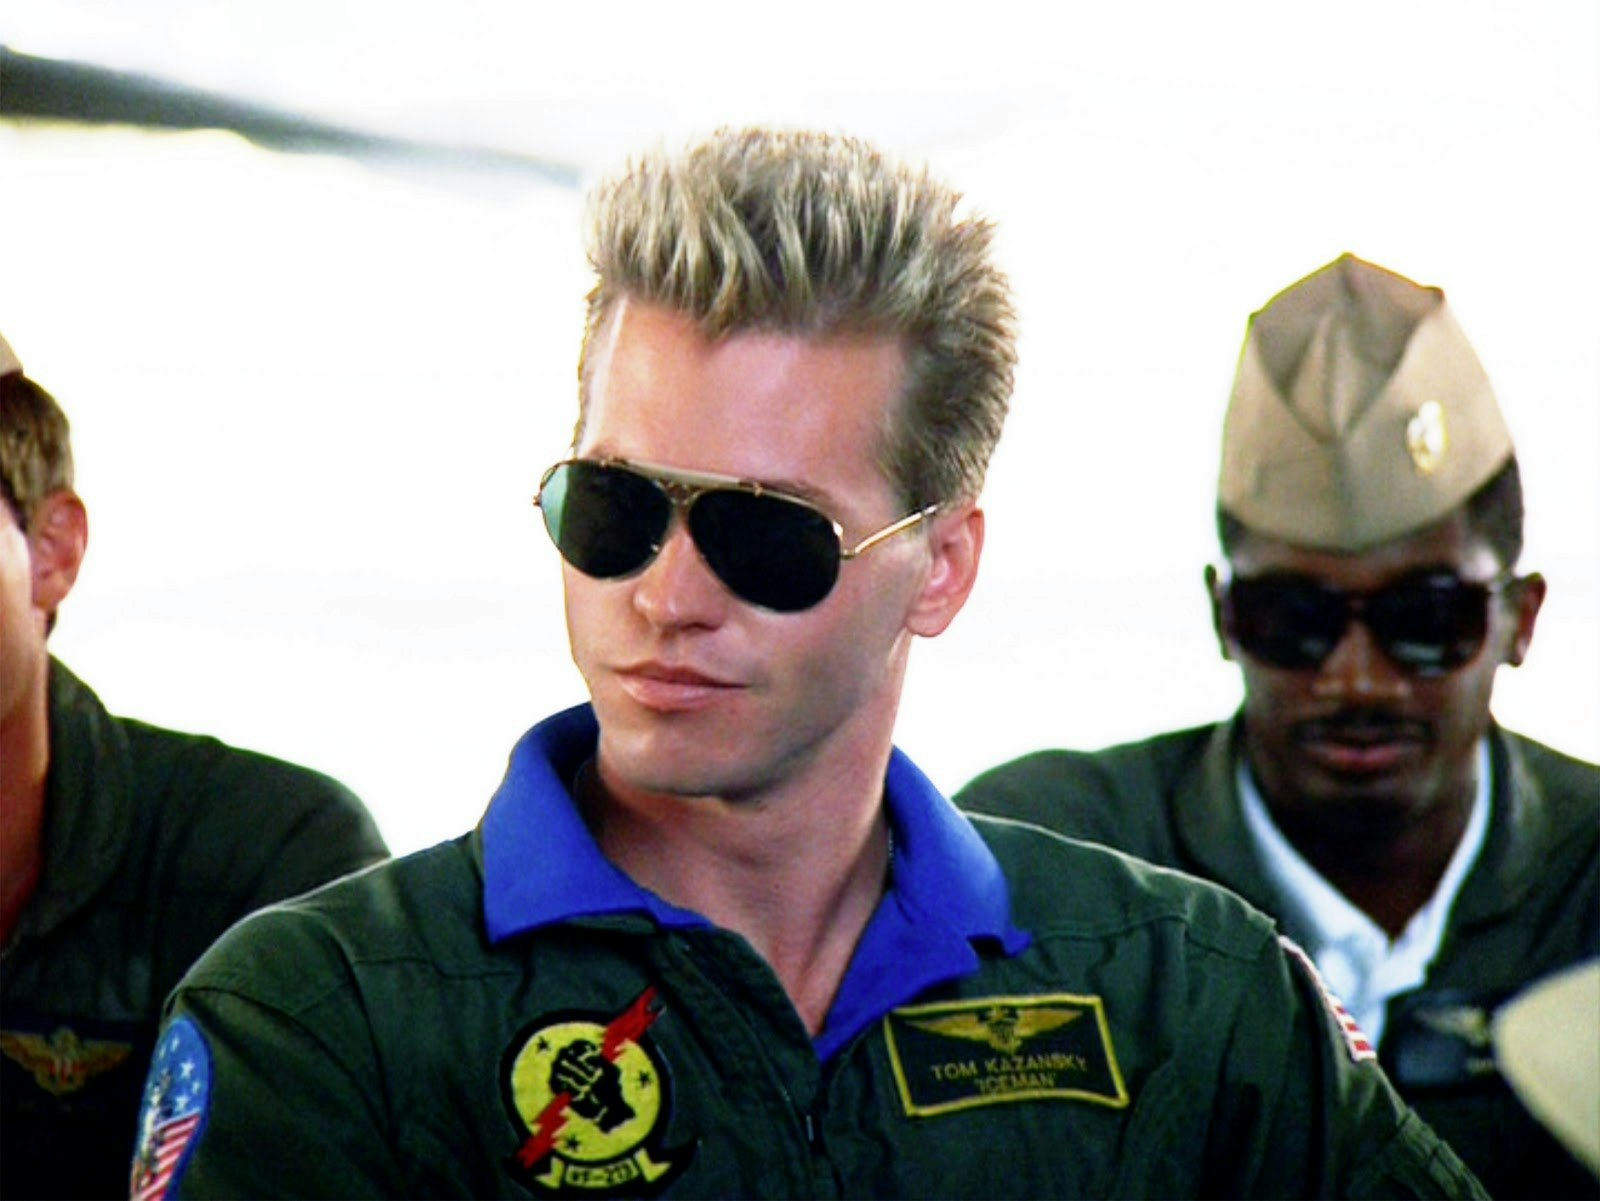 Top Gun 2: Val Kilmer confirmed to return as Iceman, The Independent